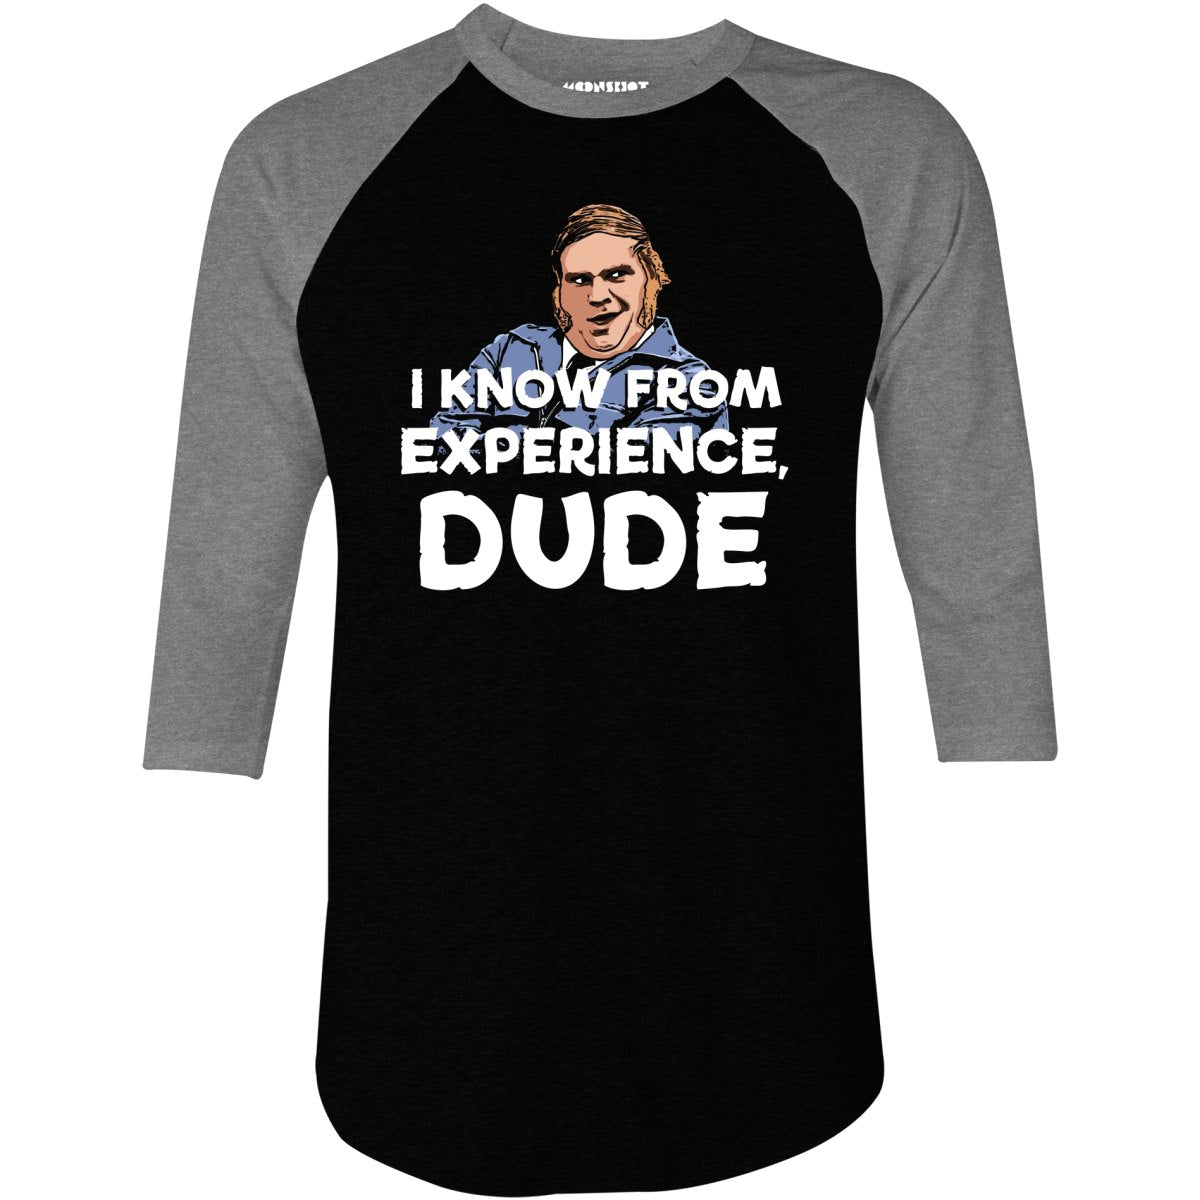 I Know From Experience, Dude - 3/4 Sleeve Raglan T-Shirt